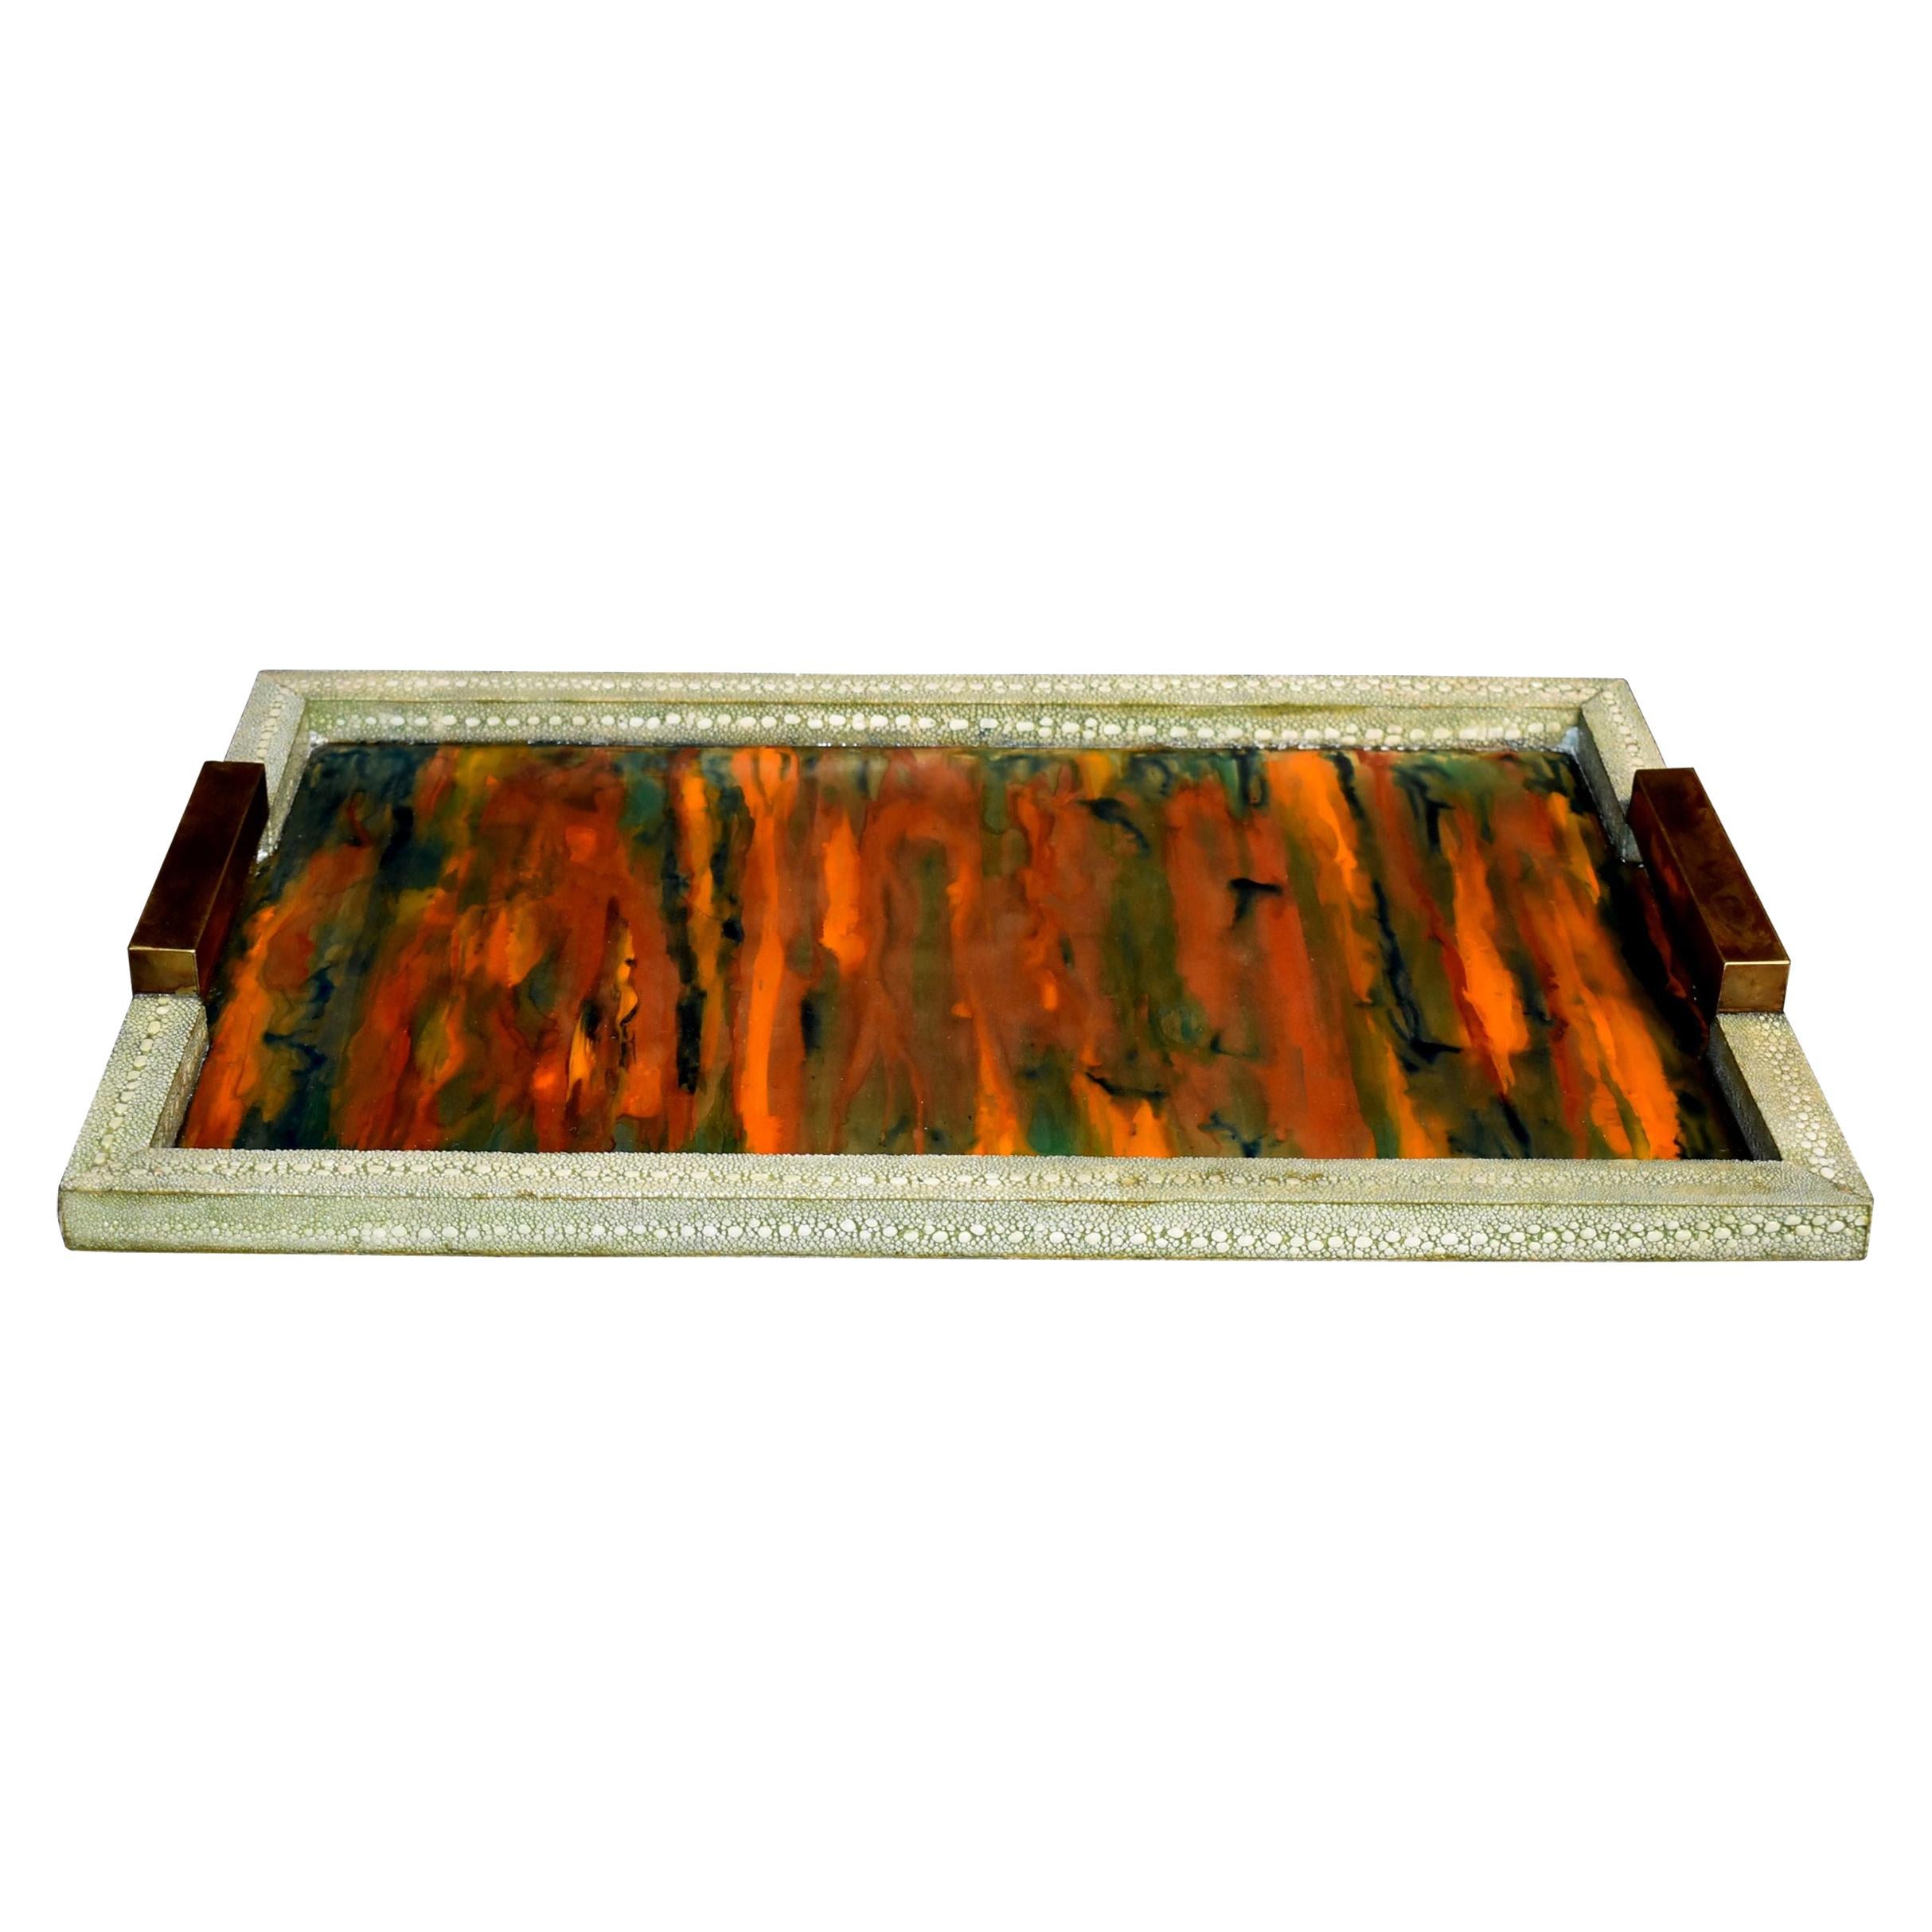 Celadon Shagreen Tray with Handles